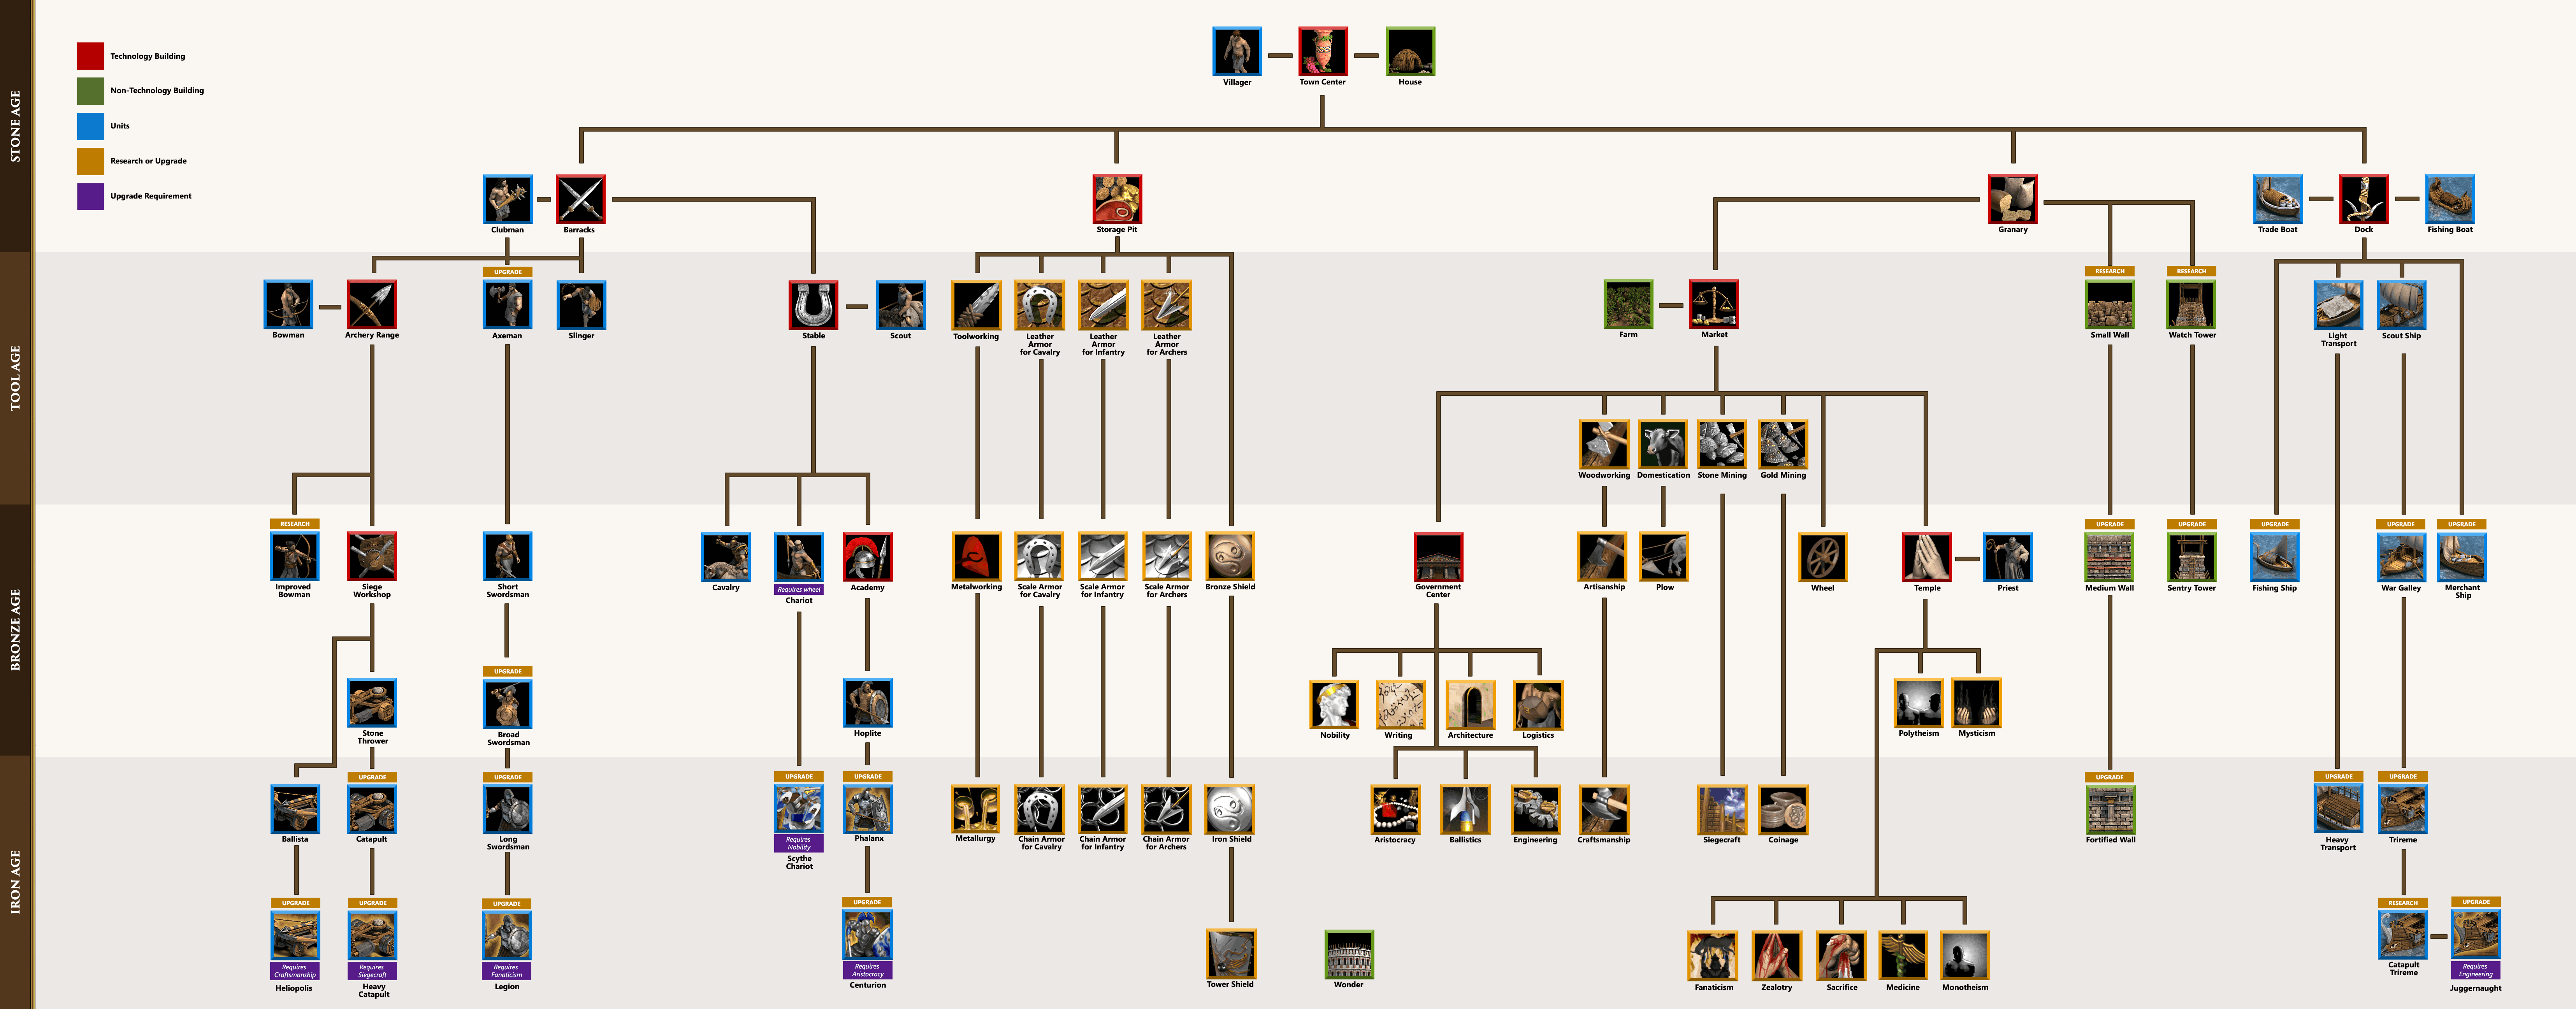 age of empires 3 tech tree